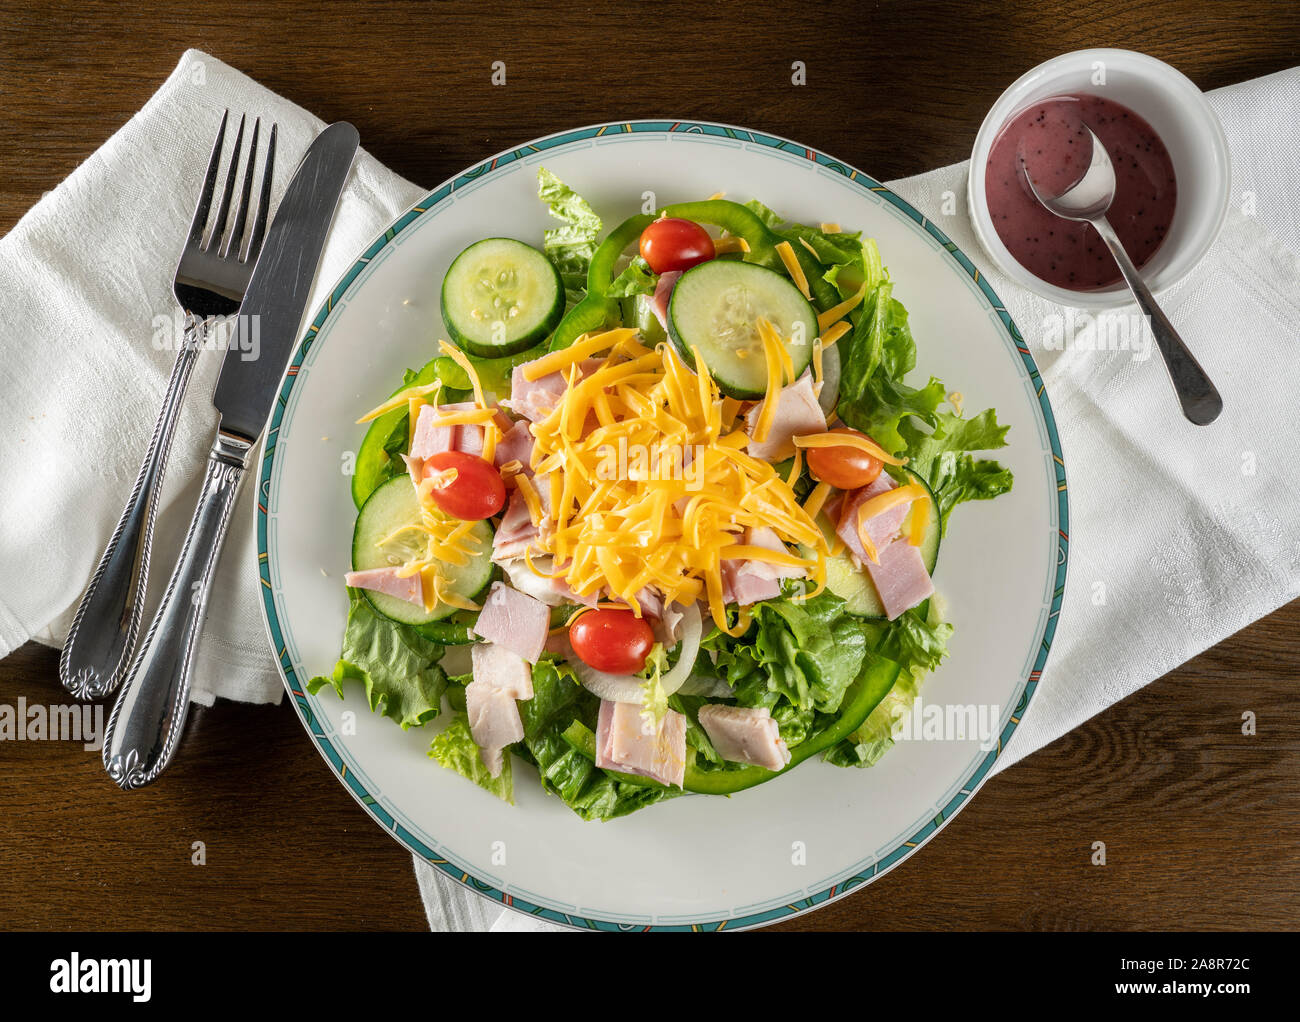 From above view of house or chef salad takeout food plated at home with napkin Stock Photo